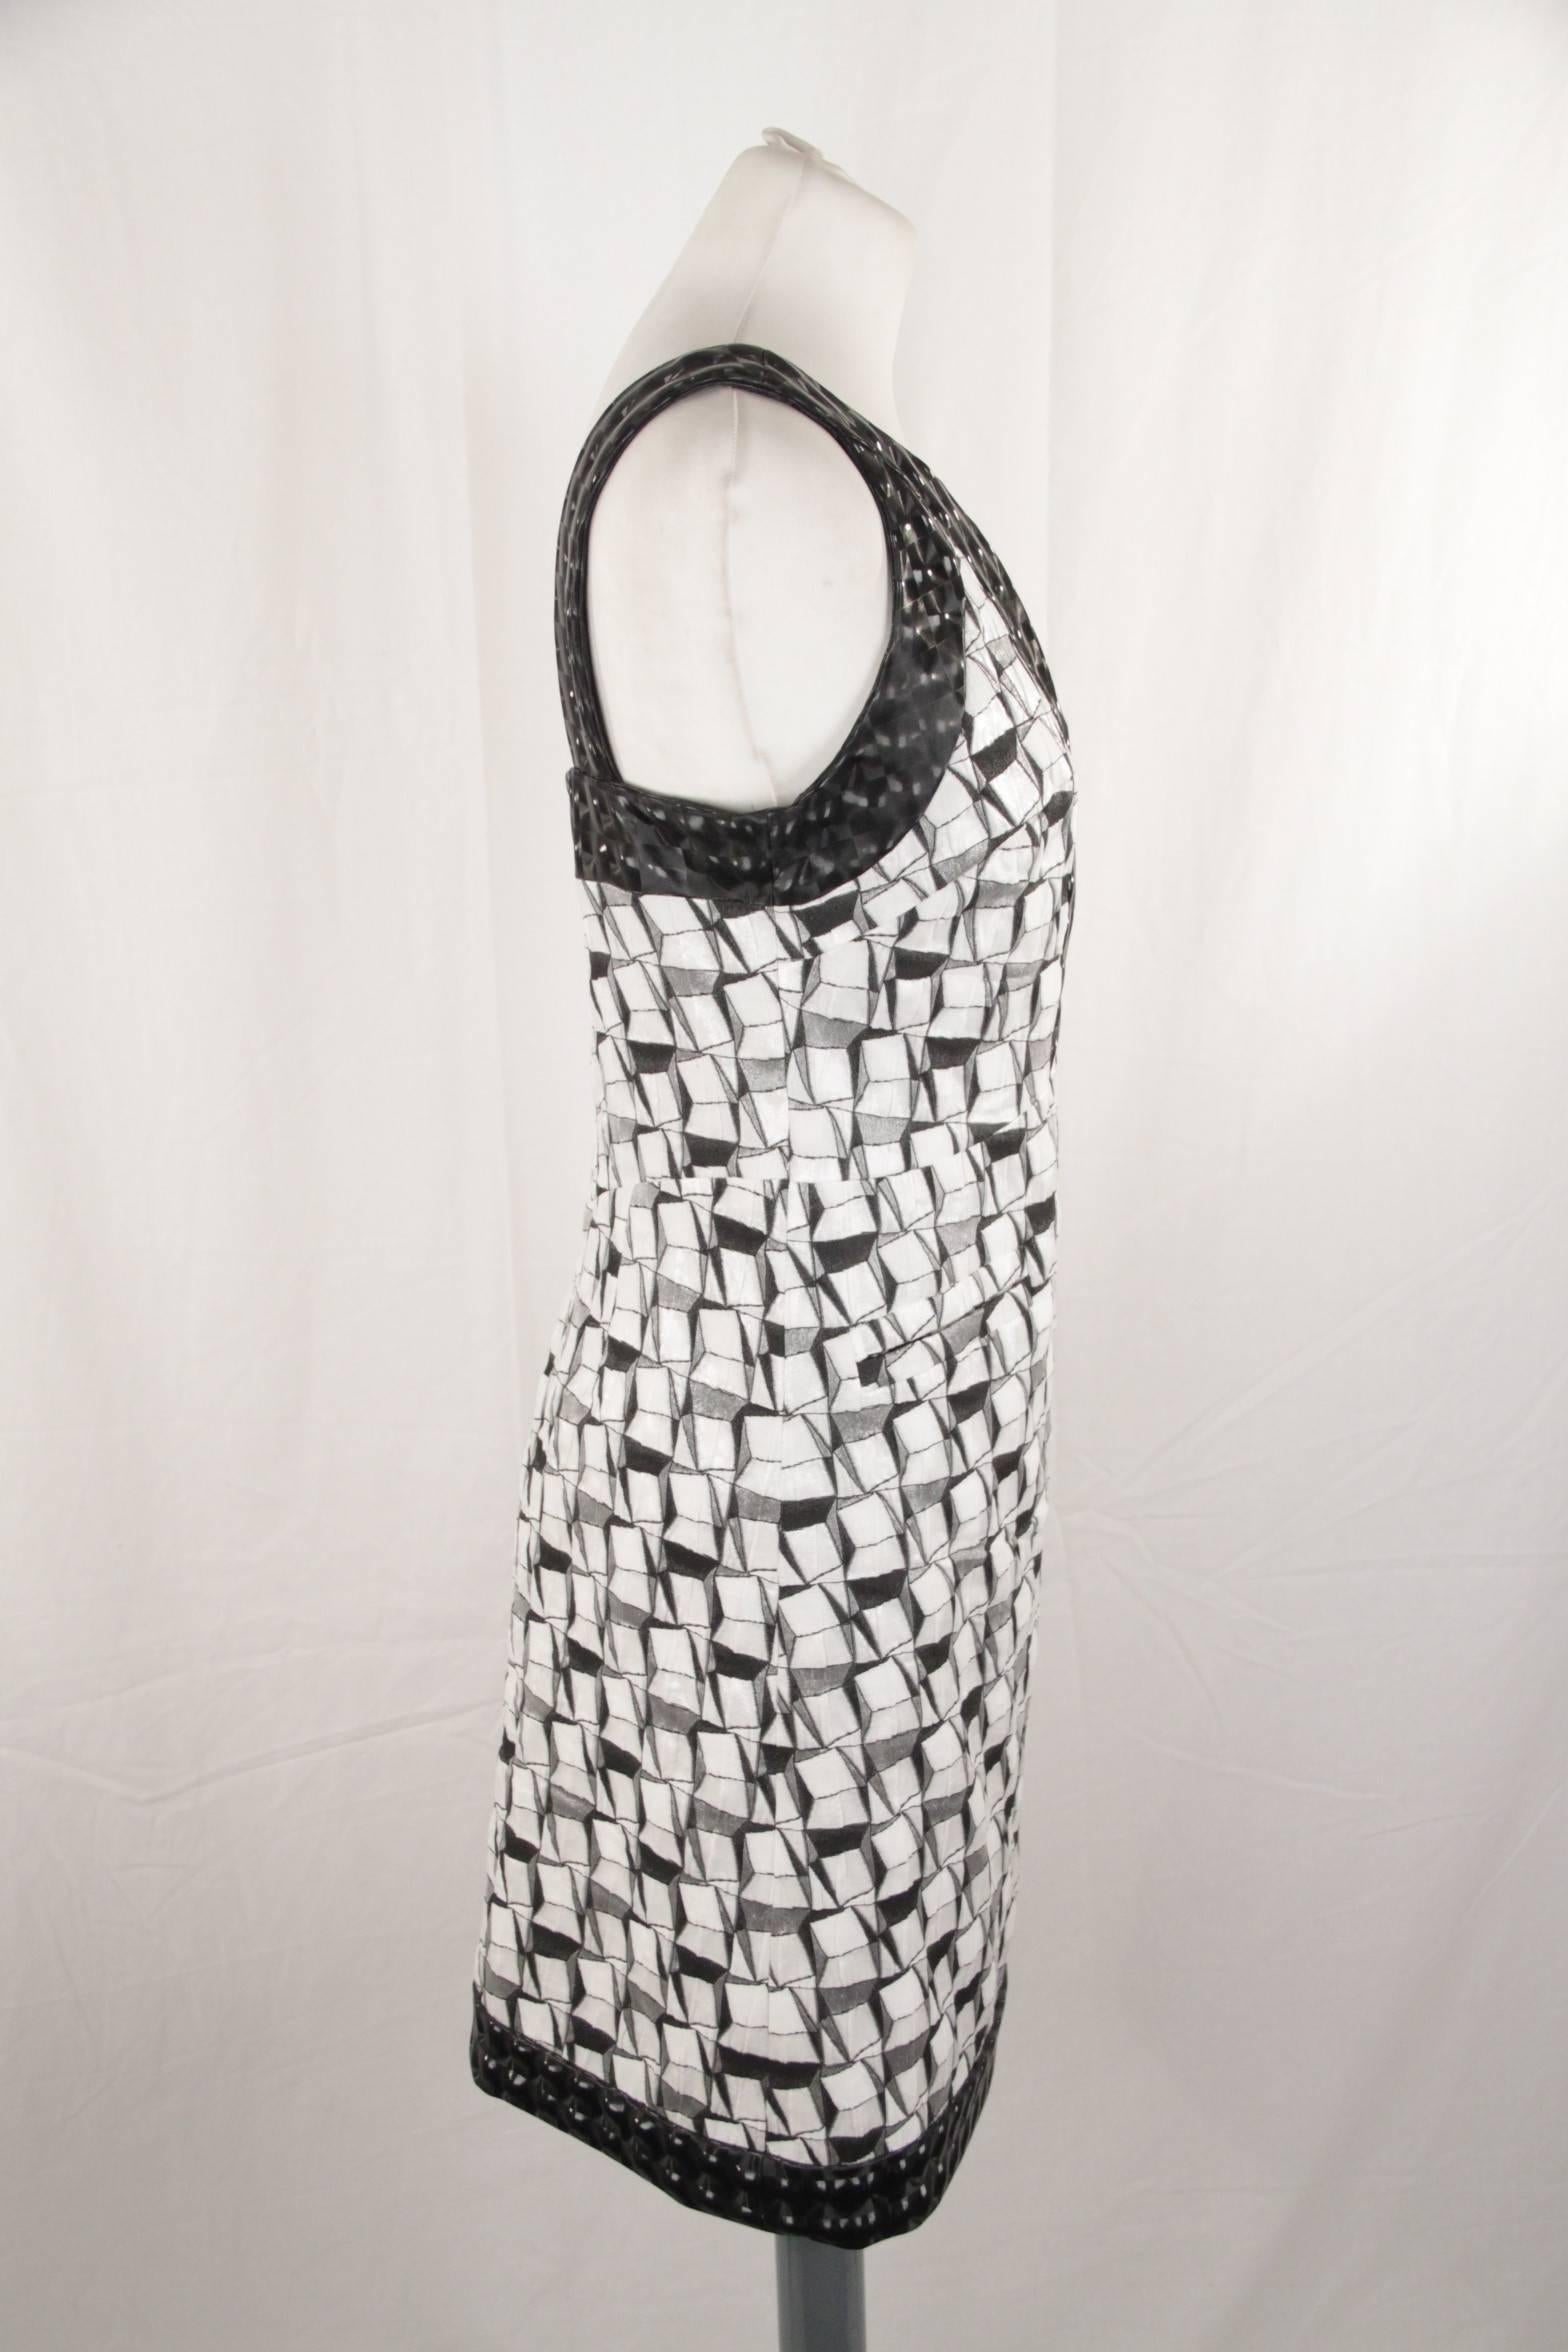  - Black and white silk and cotton-silk blend geometric jacquard dress
- V-neck
- Sleeveless design
- Low back
- Contrast black trim
- A-line shape skirt
- Knee length
- Straight hem
- White silk lining
- Size: 36 FR (The size shown for this item is